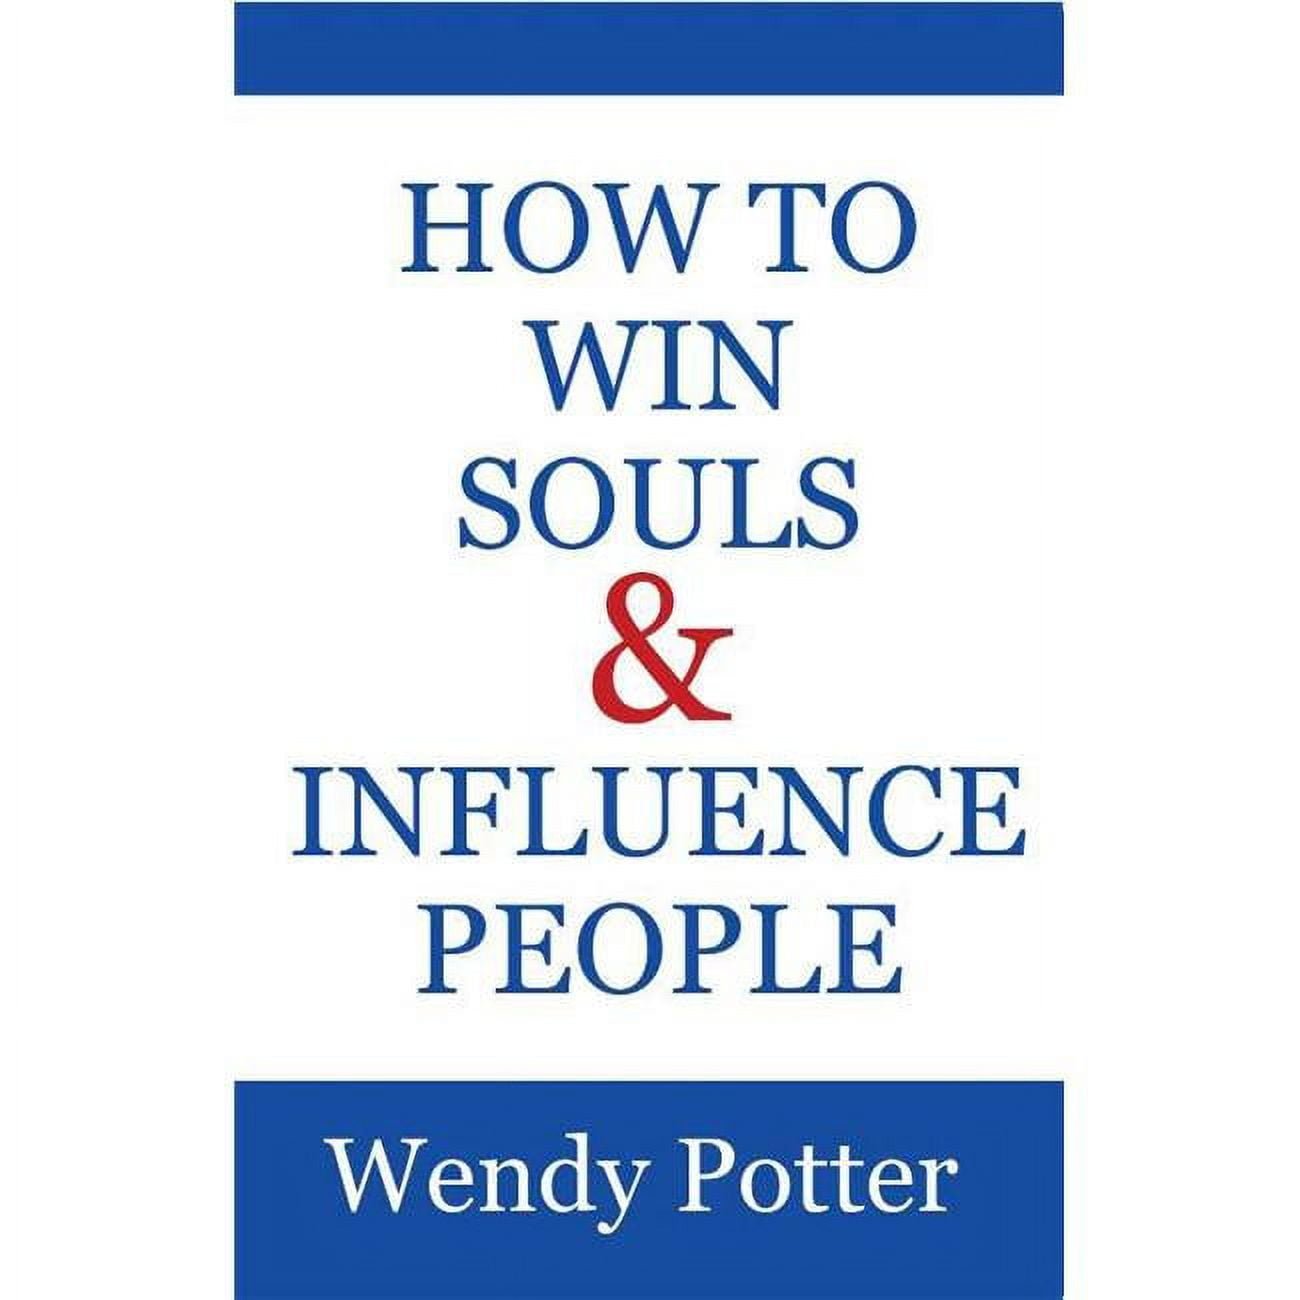 153130 How To Win Souls & Influence People